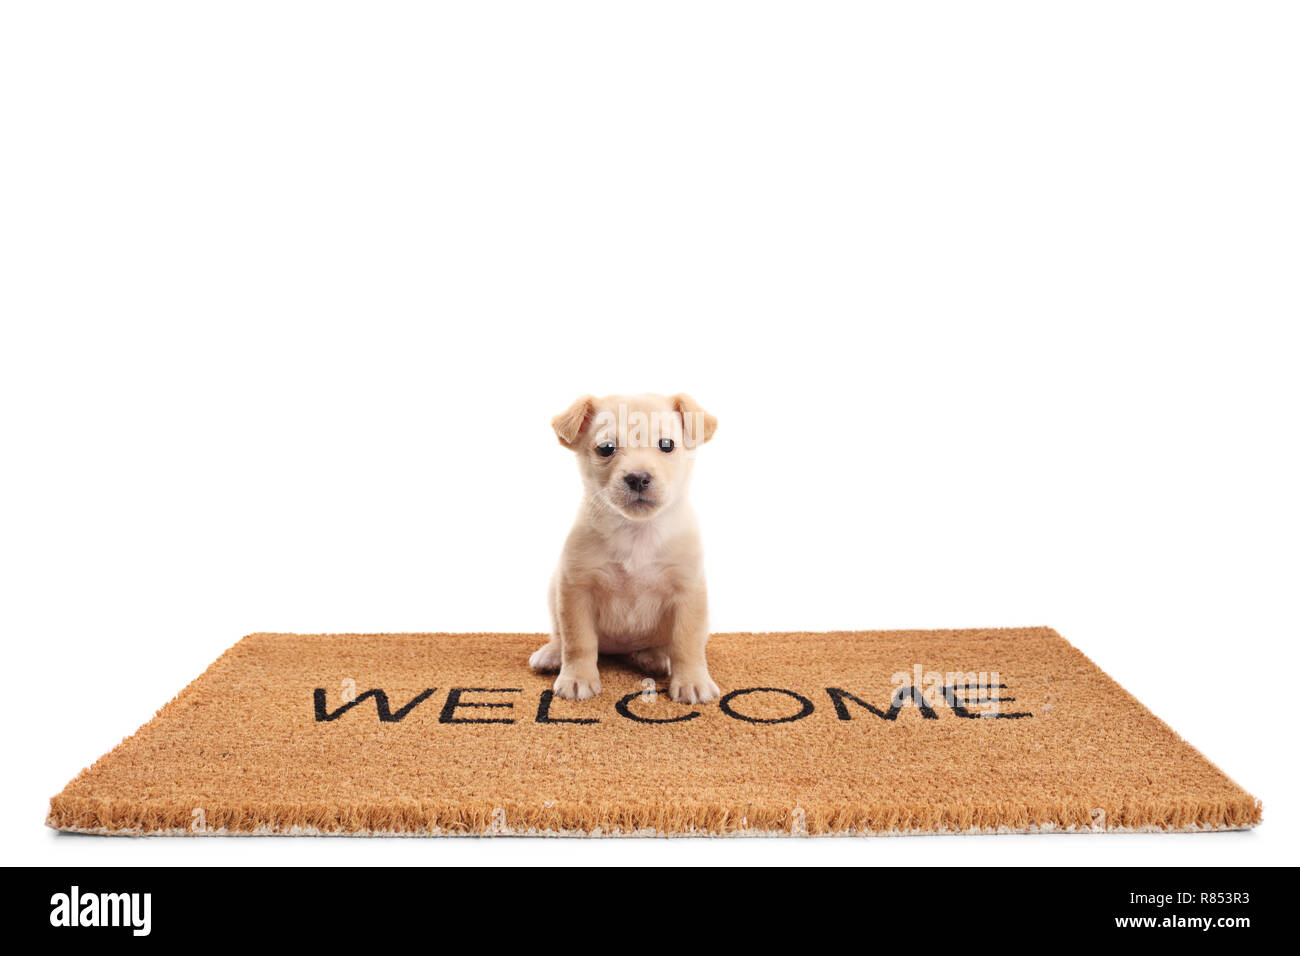 Small puppy dog sitting on a door mat with written text welcome isolated on white background Stock Photo